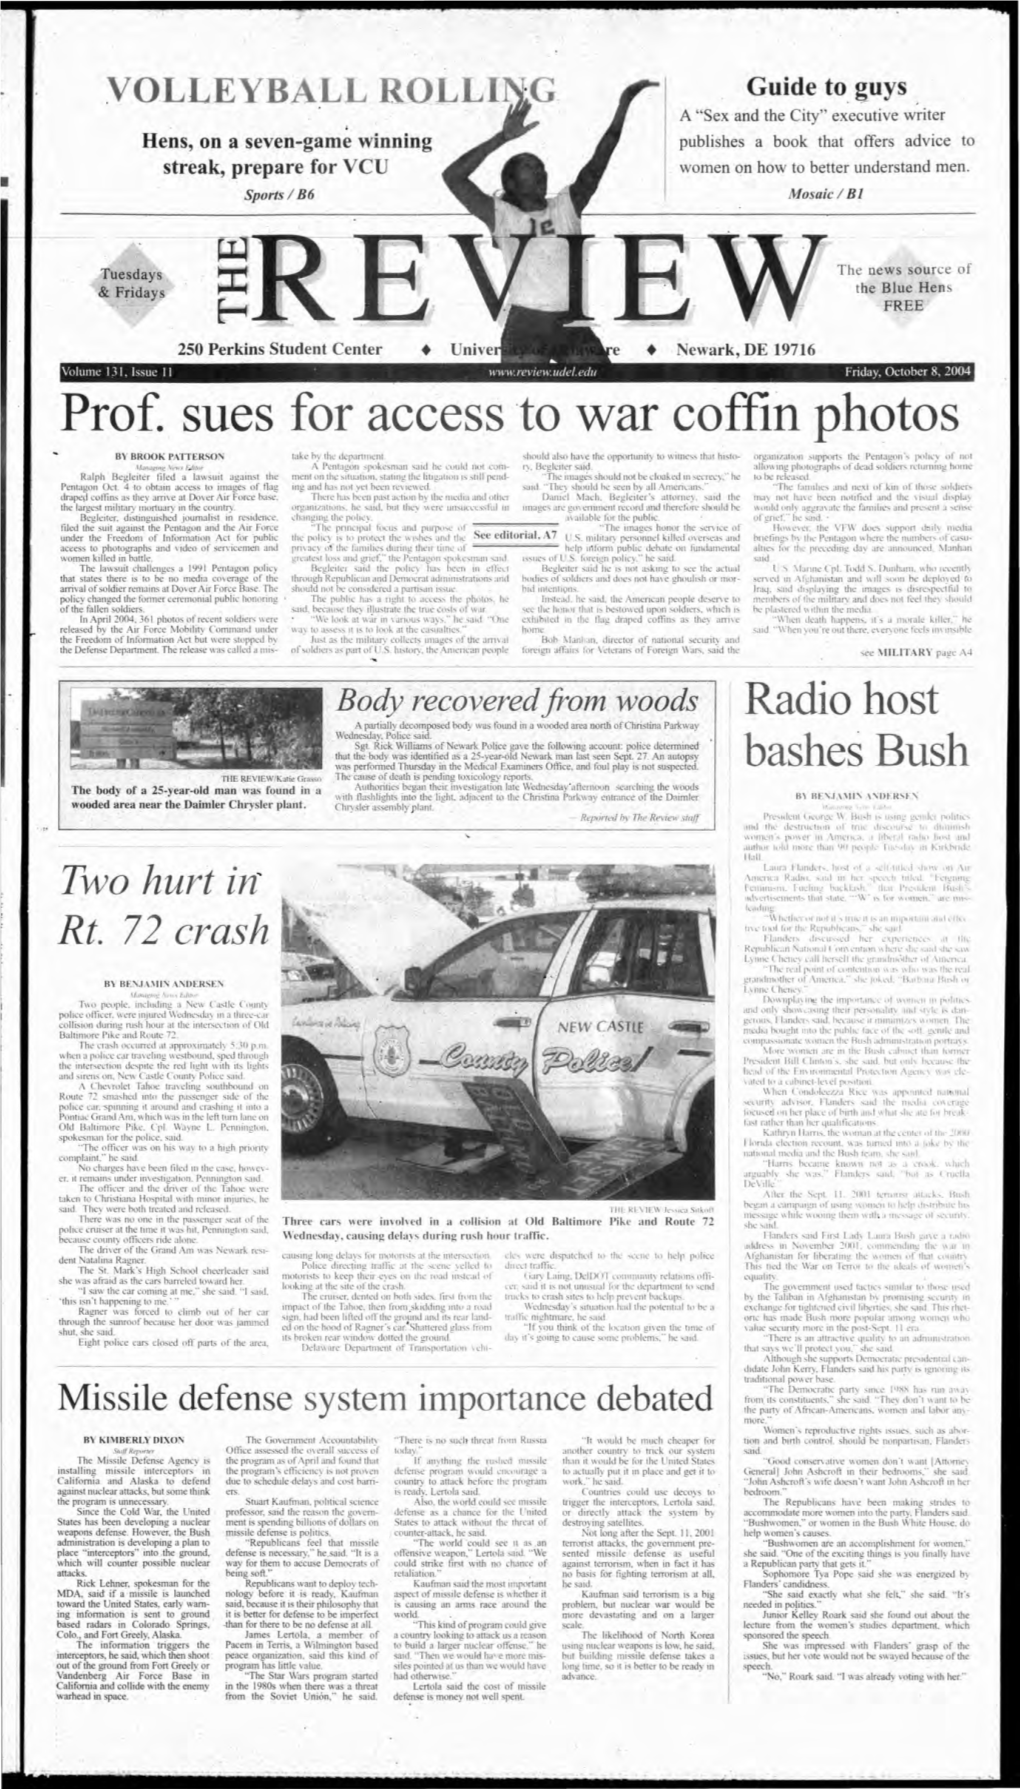 Prof. Sues for Access to War Coffin Photos